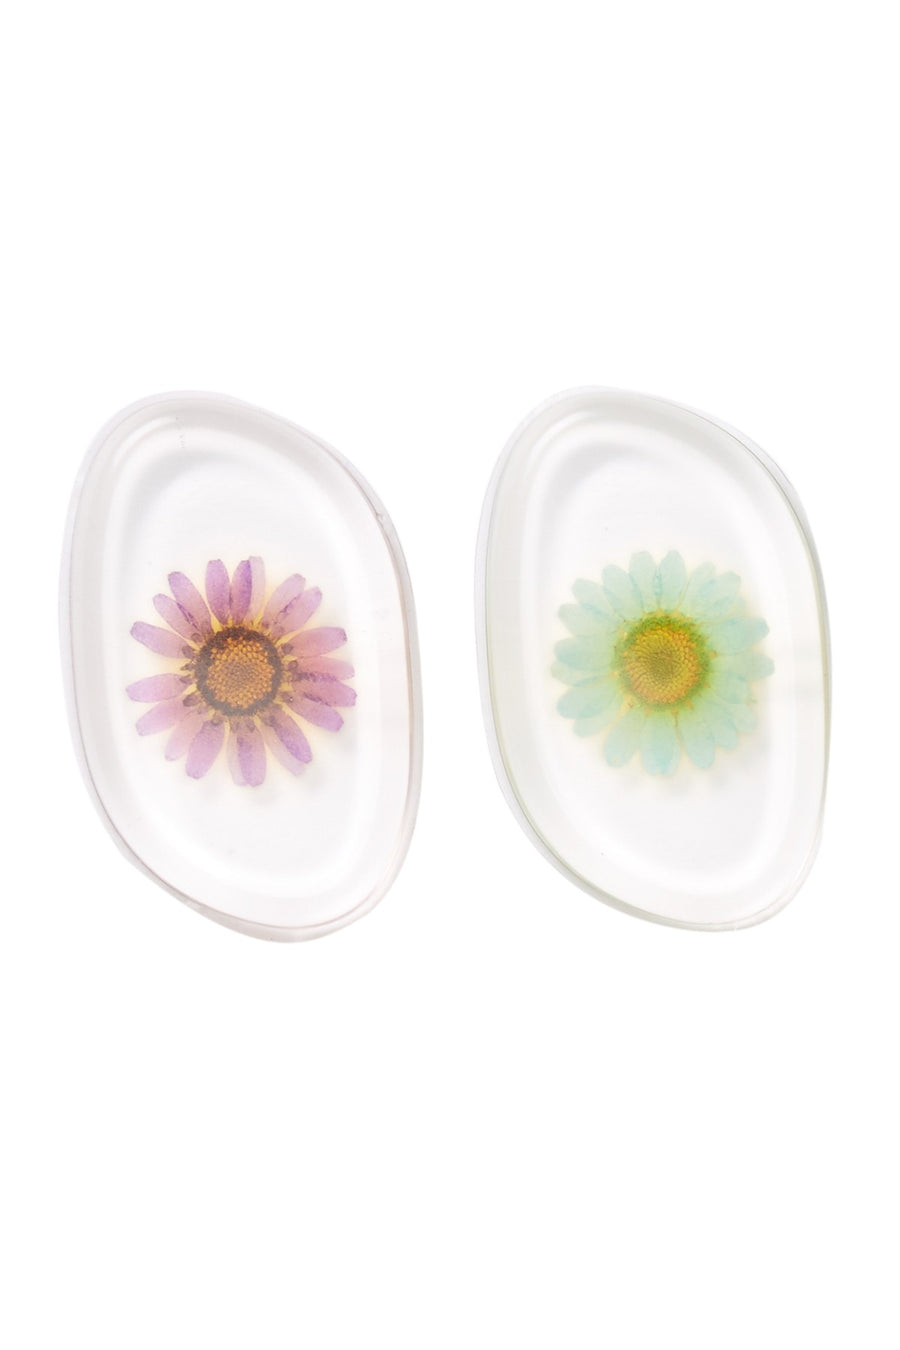 Silicone Makeup Sponge Applicator - Real Flower - Blend Mineral Cosmetics